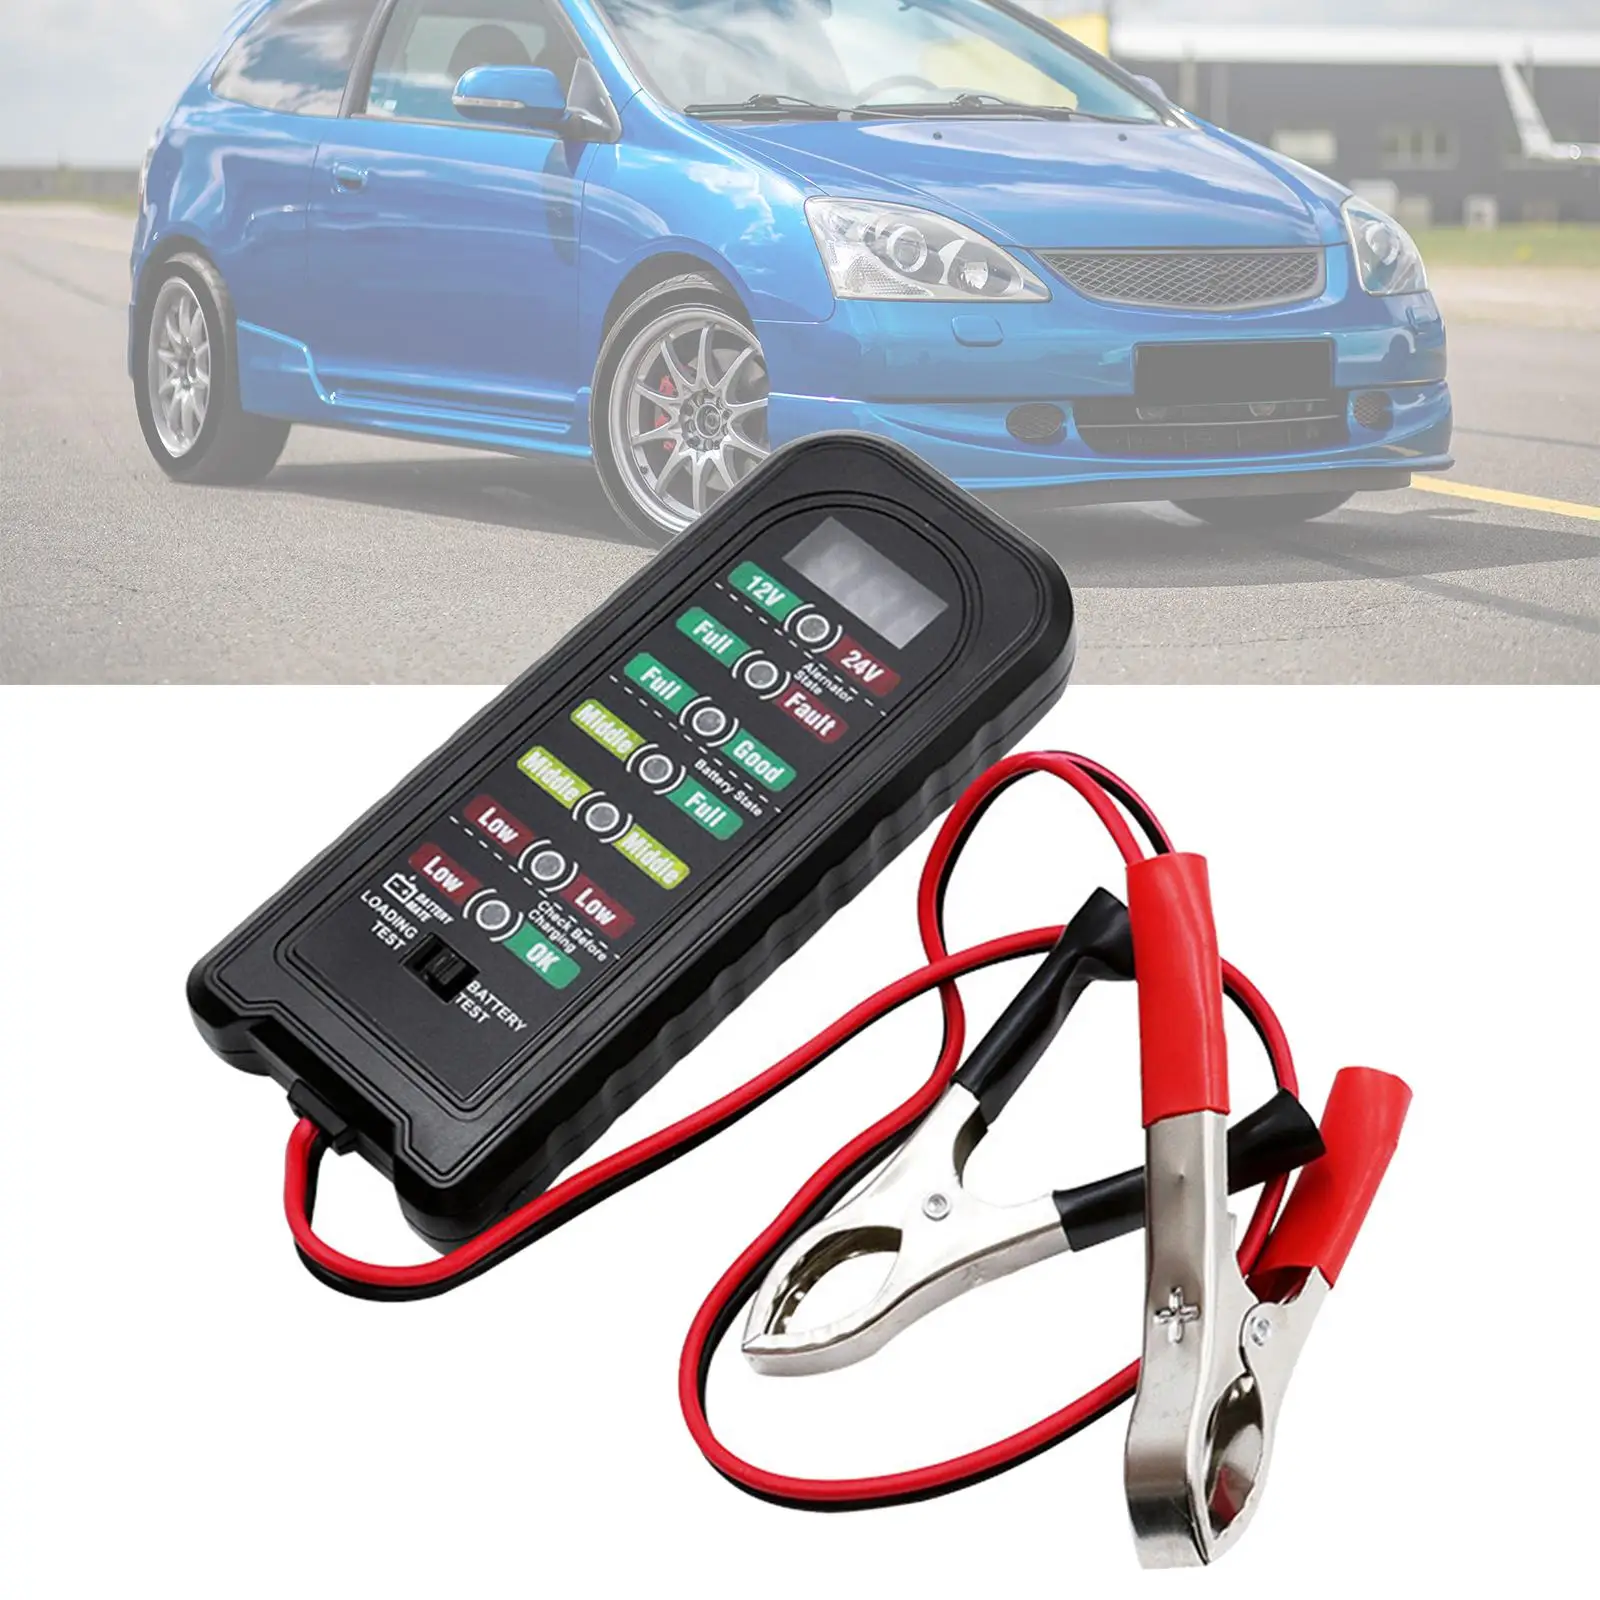 Car Battery Tester Auto Cranking and Charging System Test Car Battery Analyzer Auto Tester Tool Premium High Performance